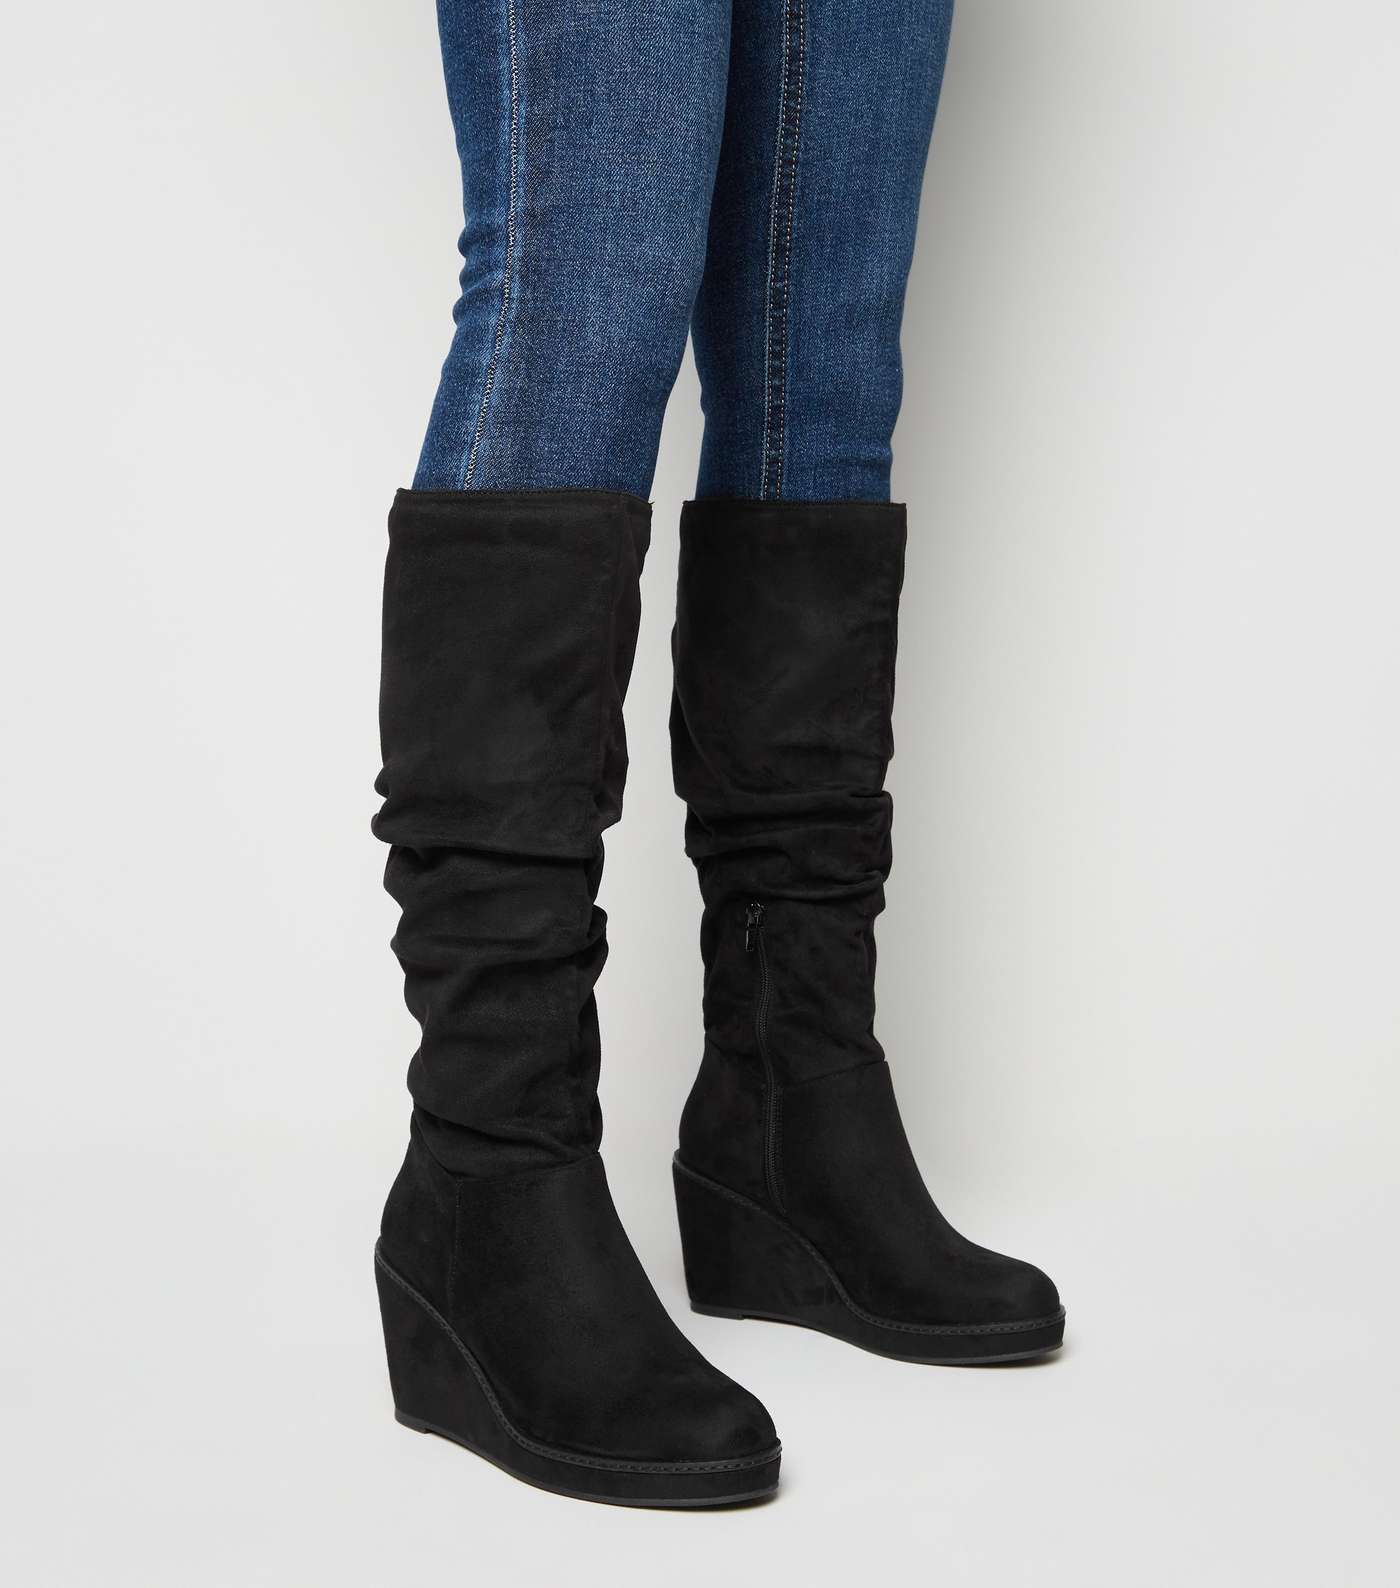 Black Suedette Knee High Slouch Wedge Boots Image 2